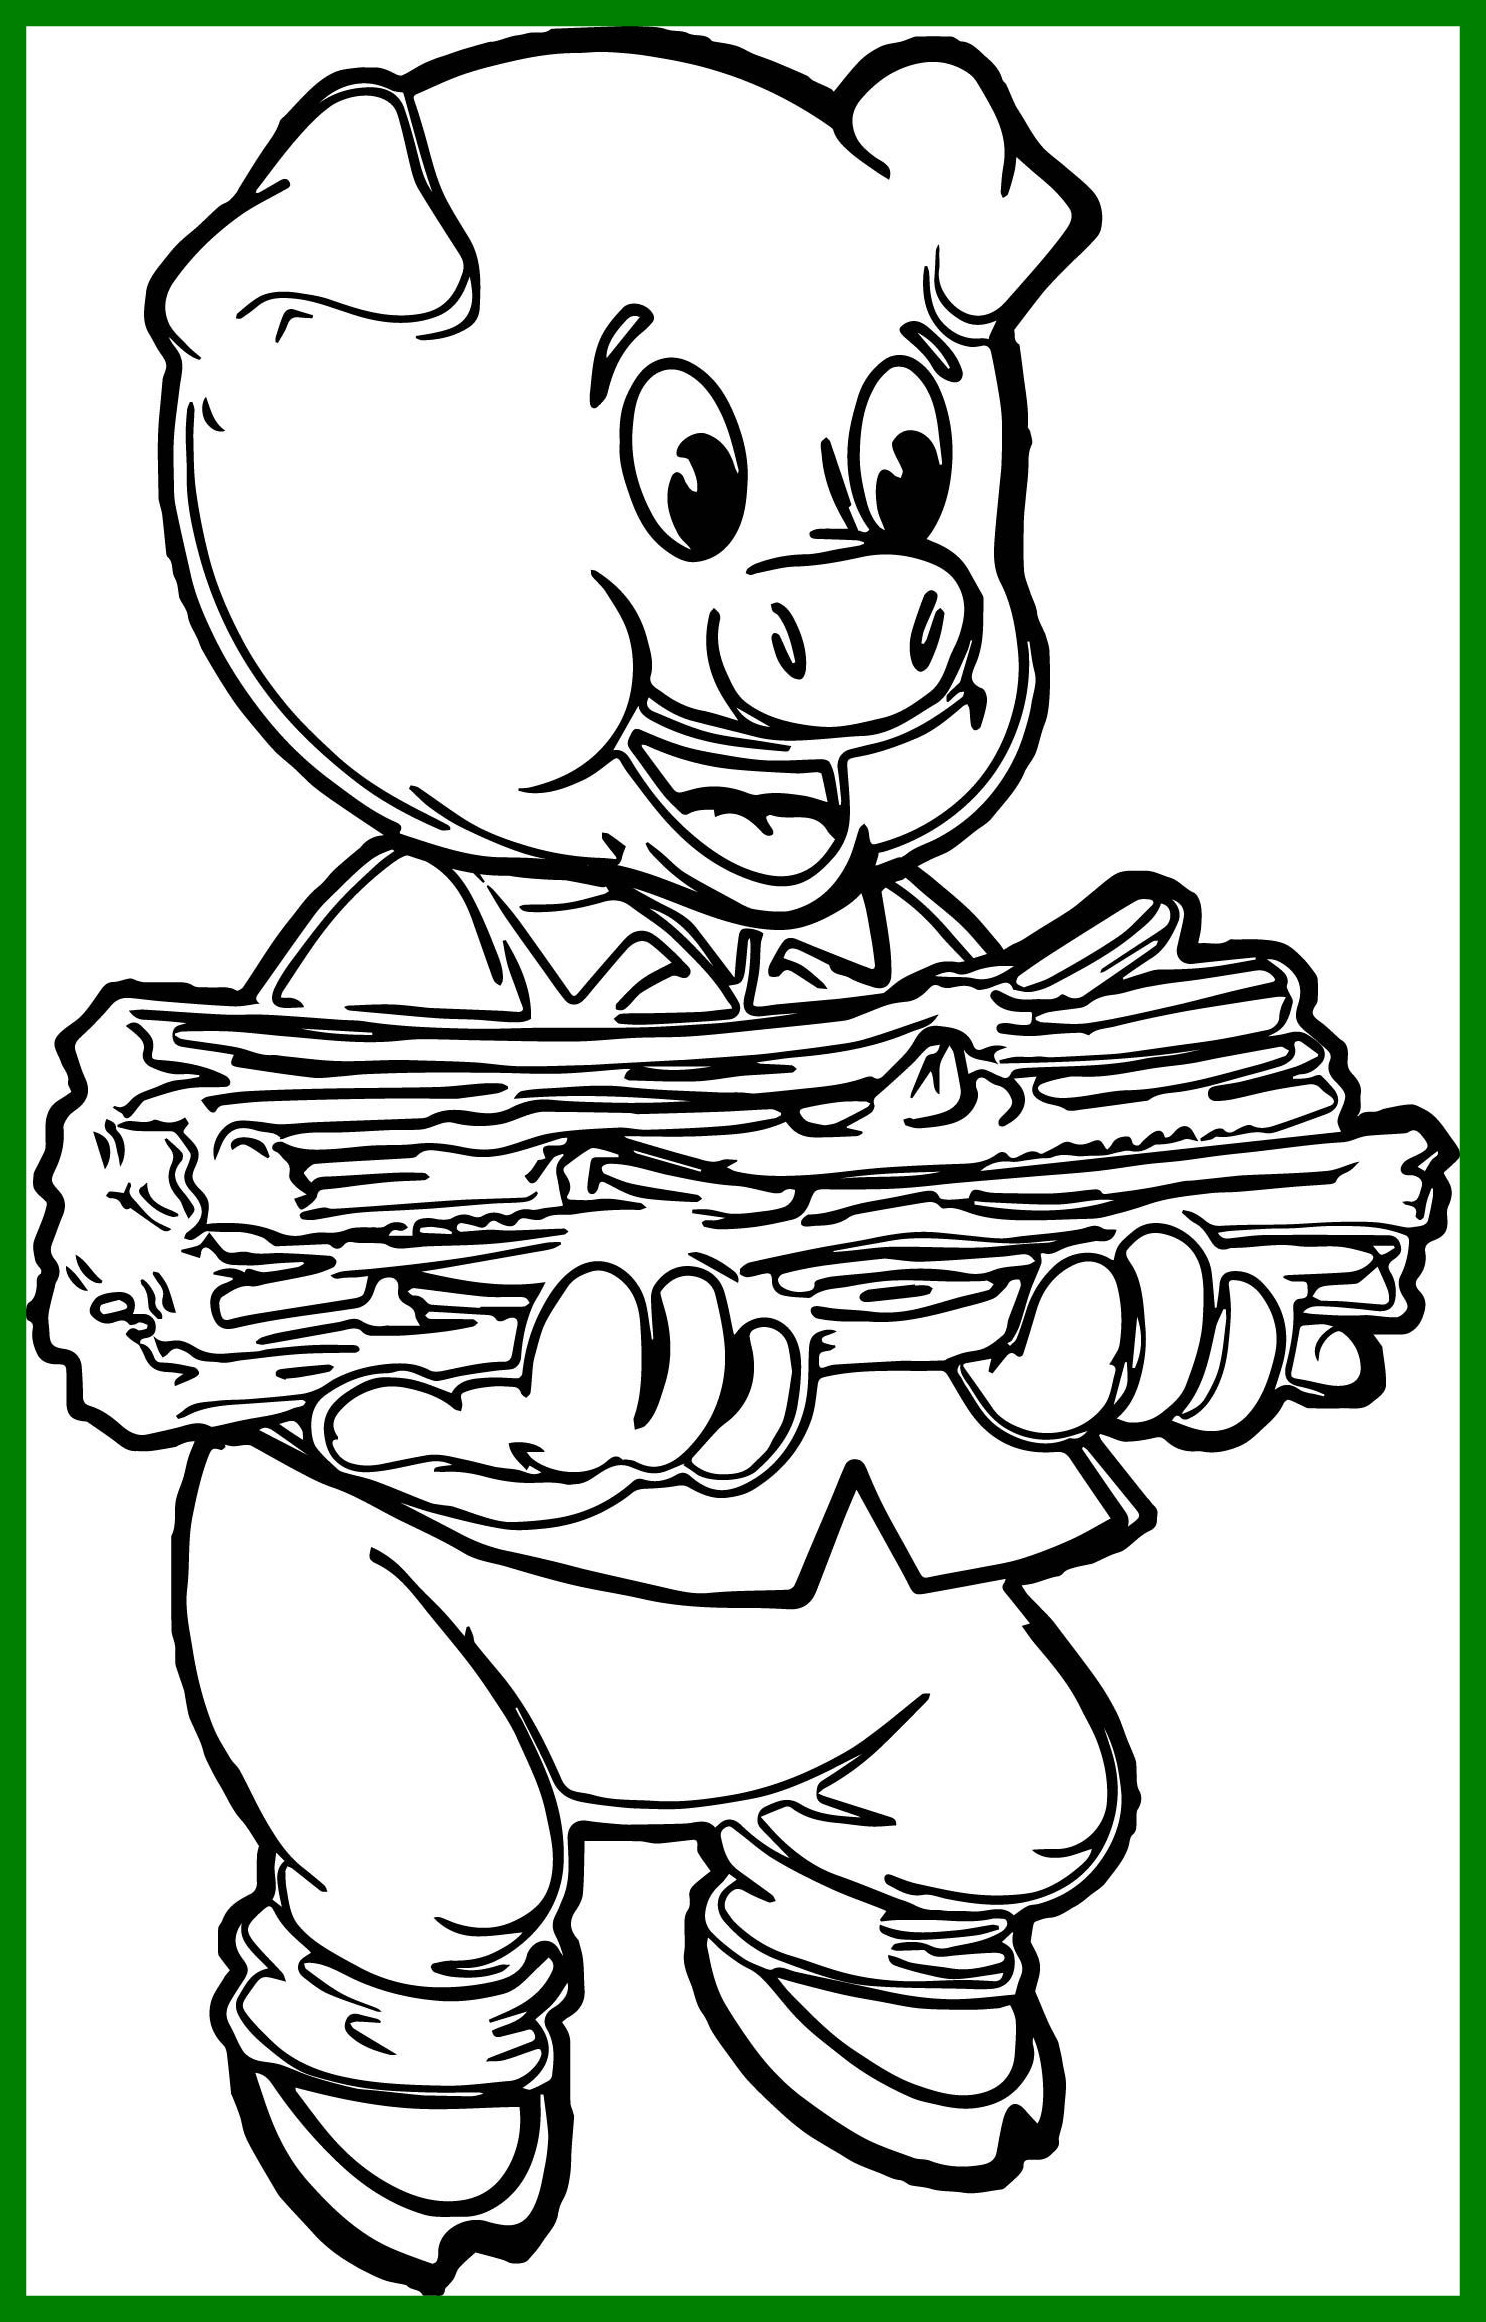 Minecraft Pig Coloring Pages at GetColorings.com | Free printable ...